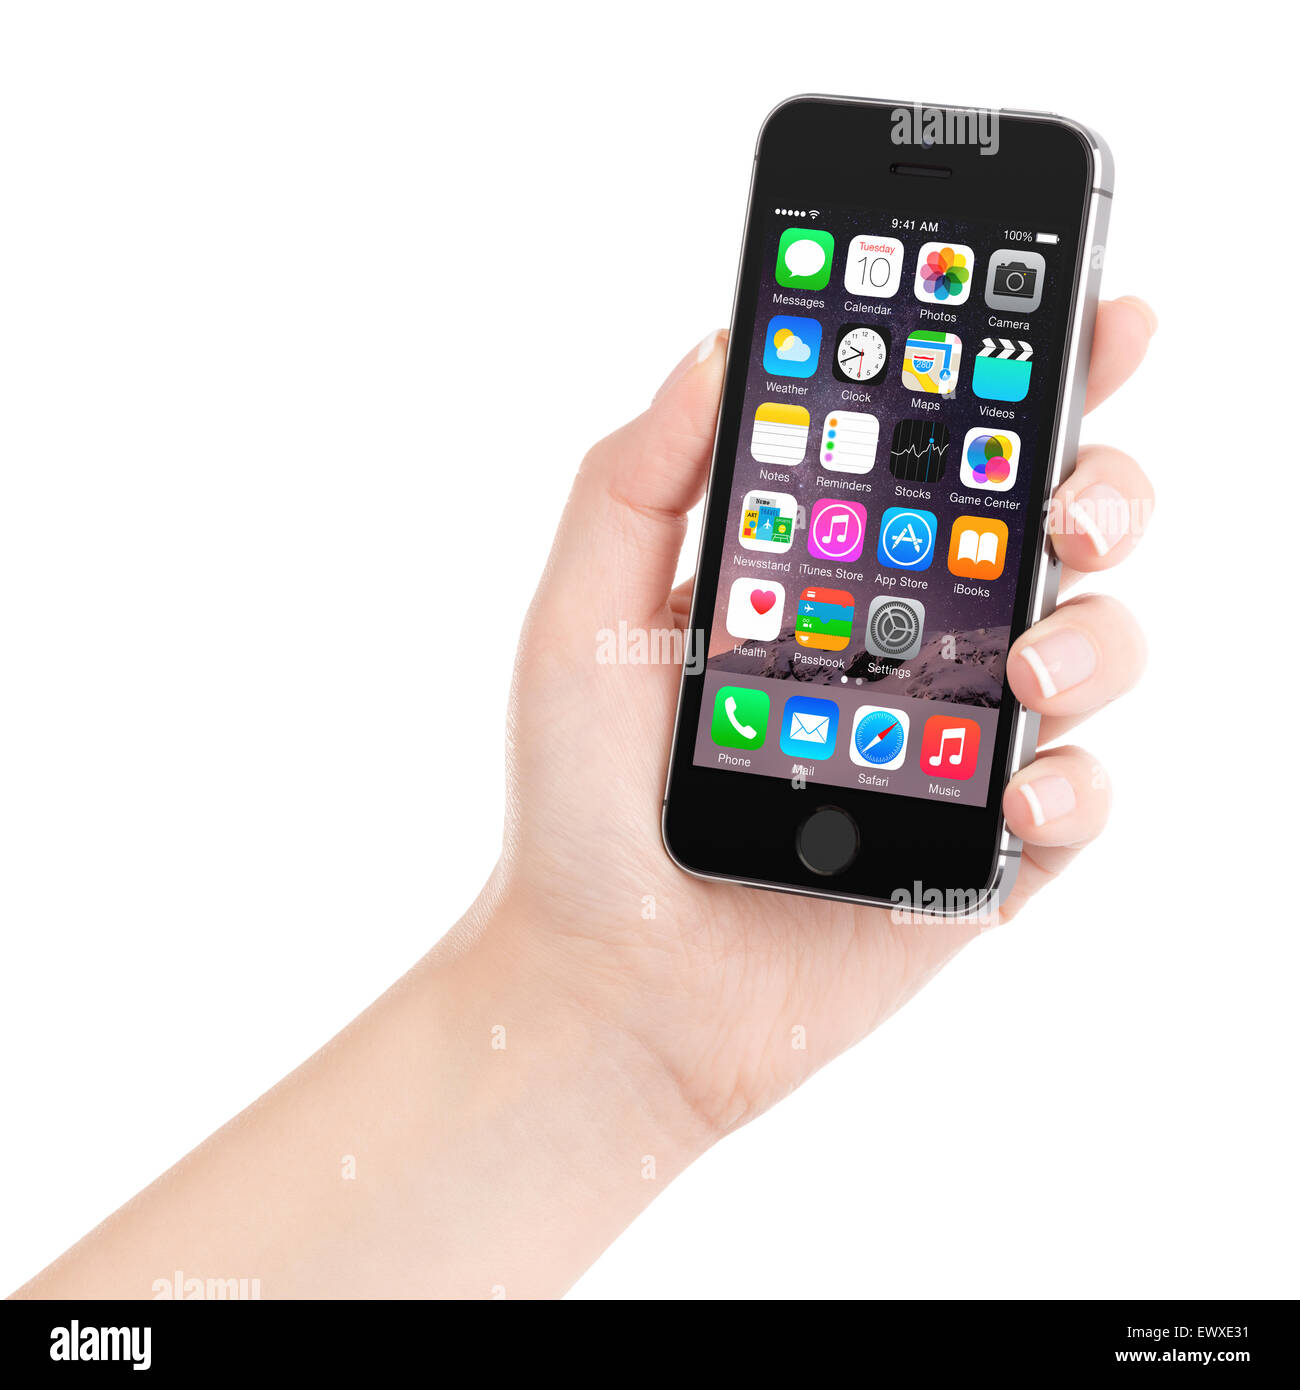 Varna, Bulgaria - December 07, 2013: Female hand holding Apple Space Gray iPhone 5S displaying iOS 8 mobile operating system Stock Photo